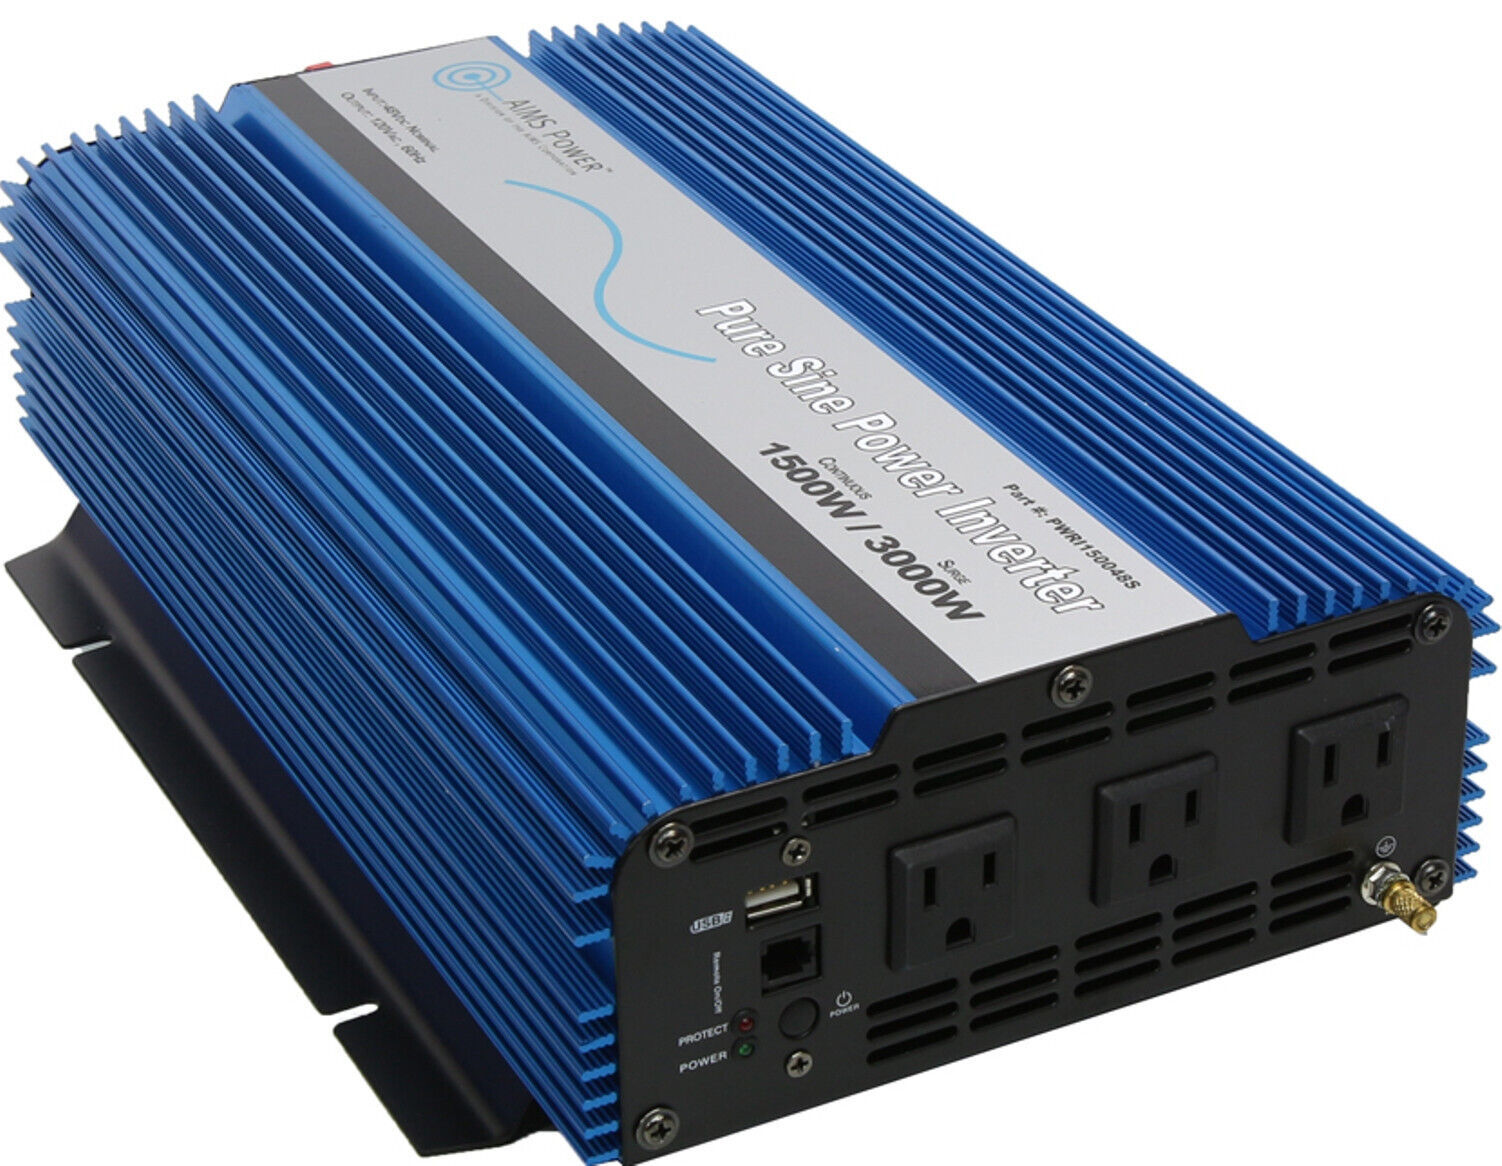 Primary image for AIMS Power PWRI150024S 1500-Watt 24 Volt Pure Sine Power Inverter with USB Port